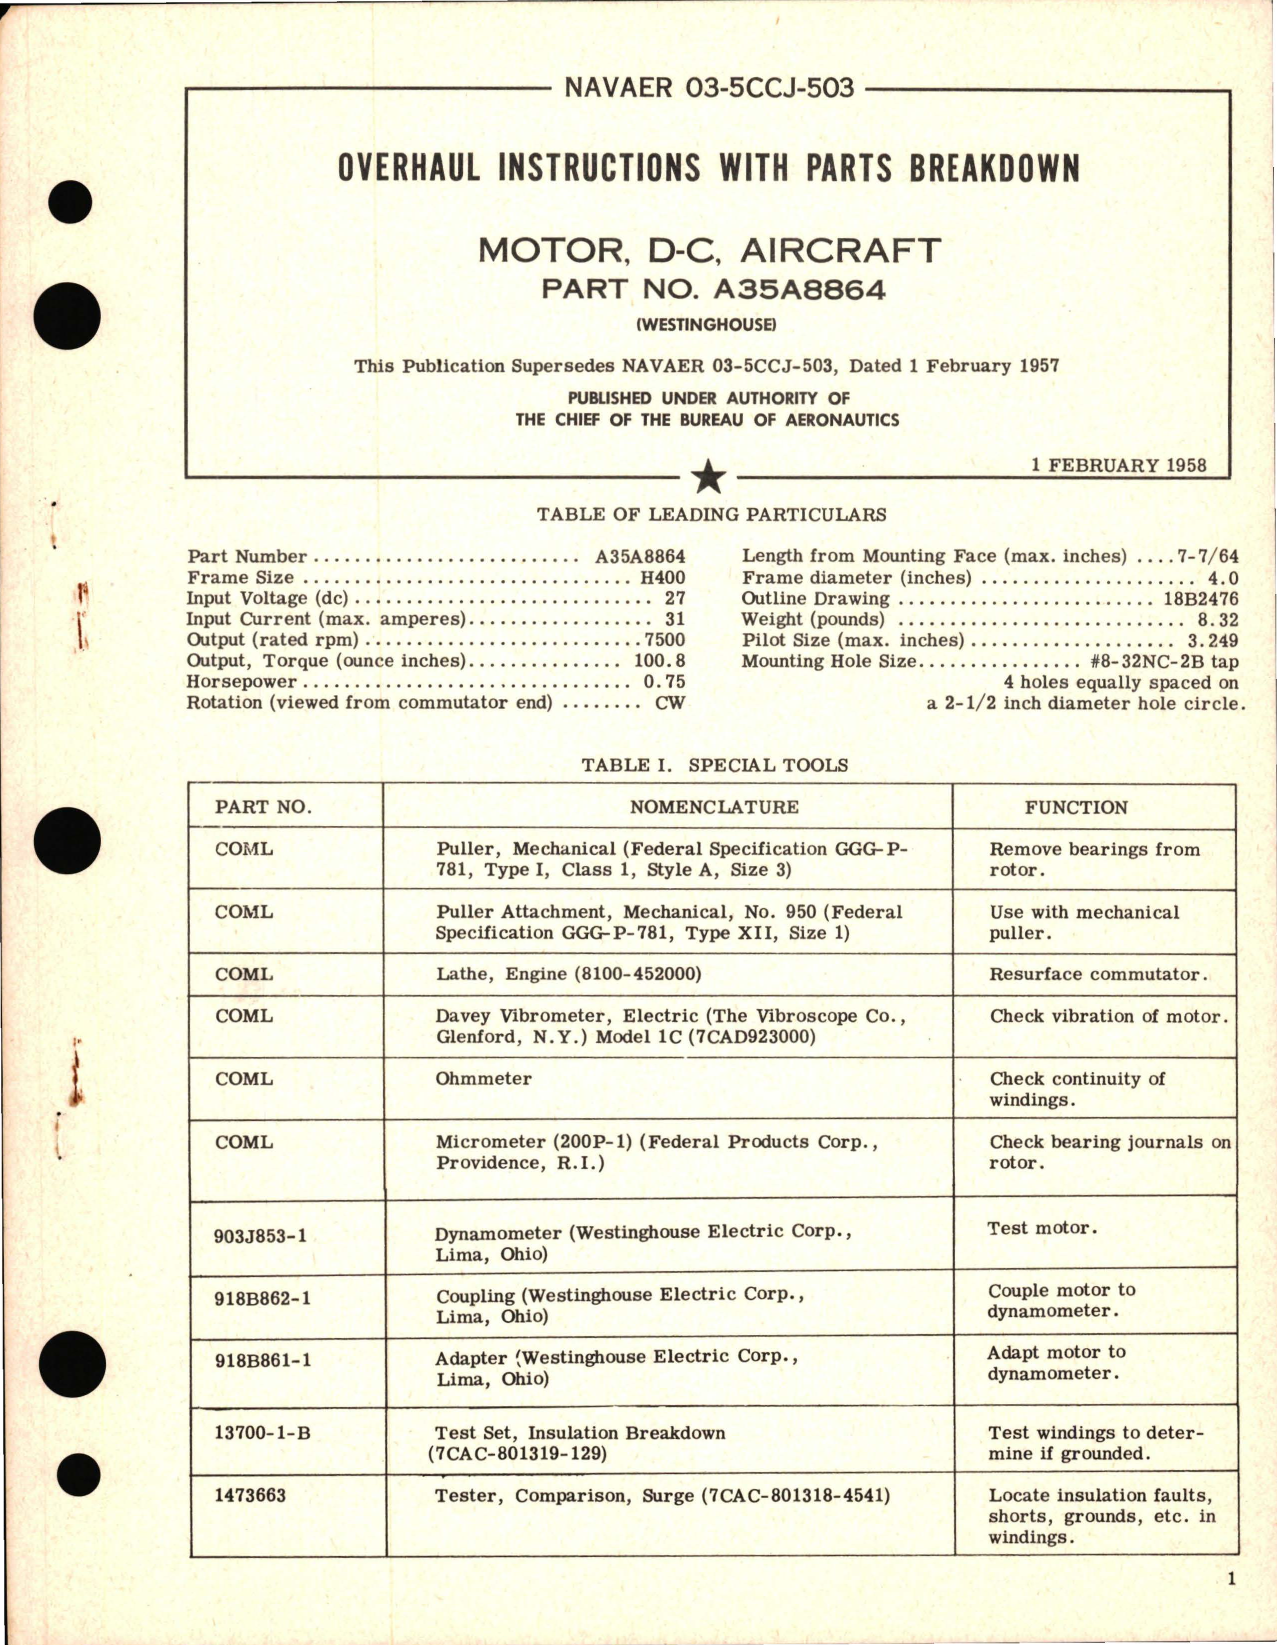 Sample page 1 from AirCorps Library document: Overhaul Instructions with Parts Breakdown for Motor, D-C, Aircraft - Part A35A8864 